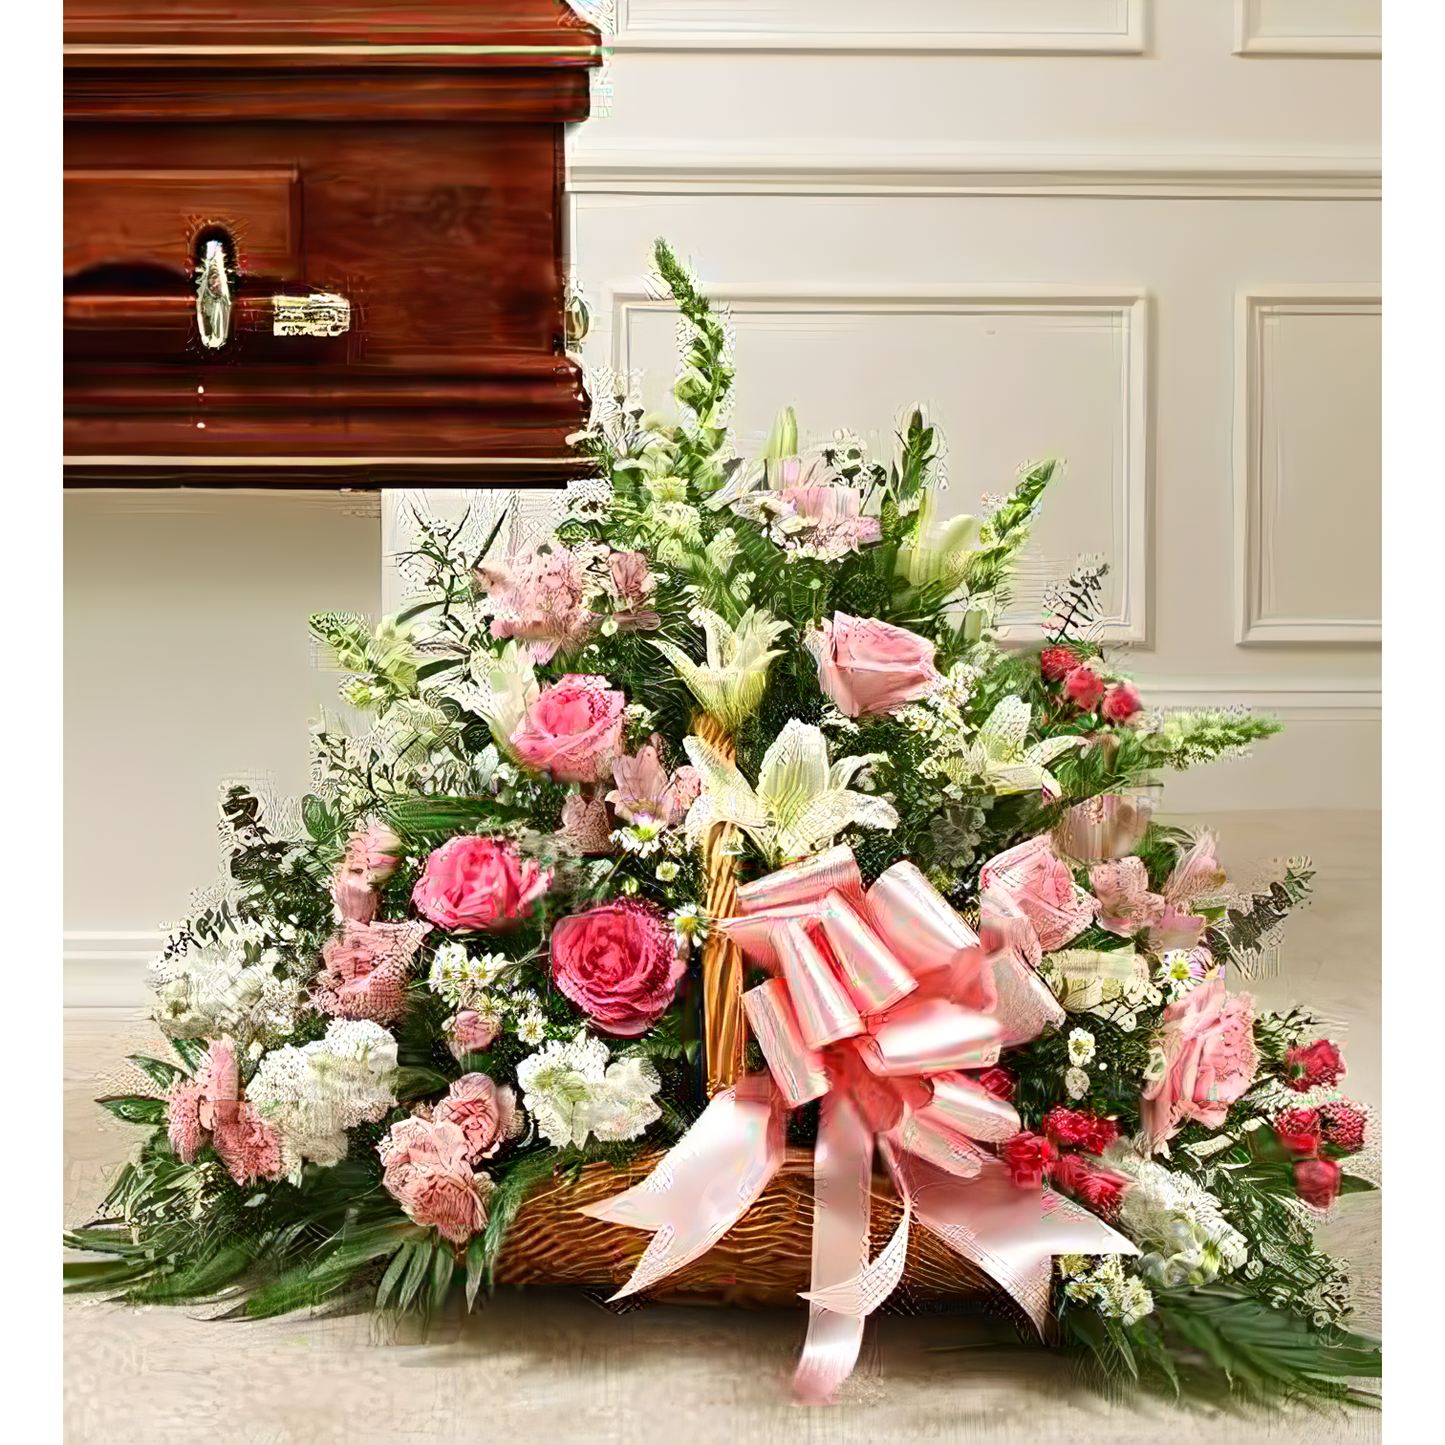 Sincerest Sympathies Fireside Basket-Pink &amp; White - Funeral > For the Service